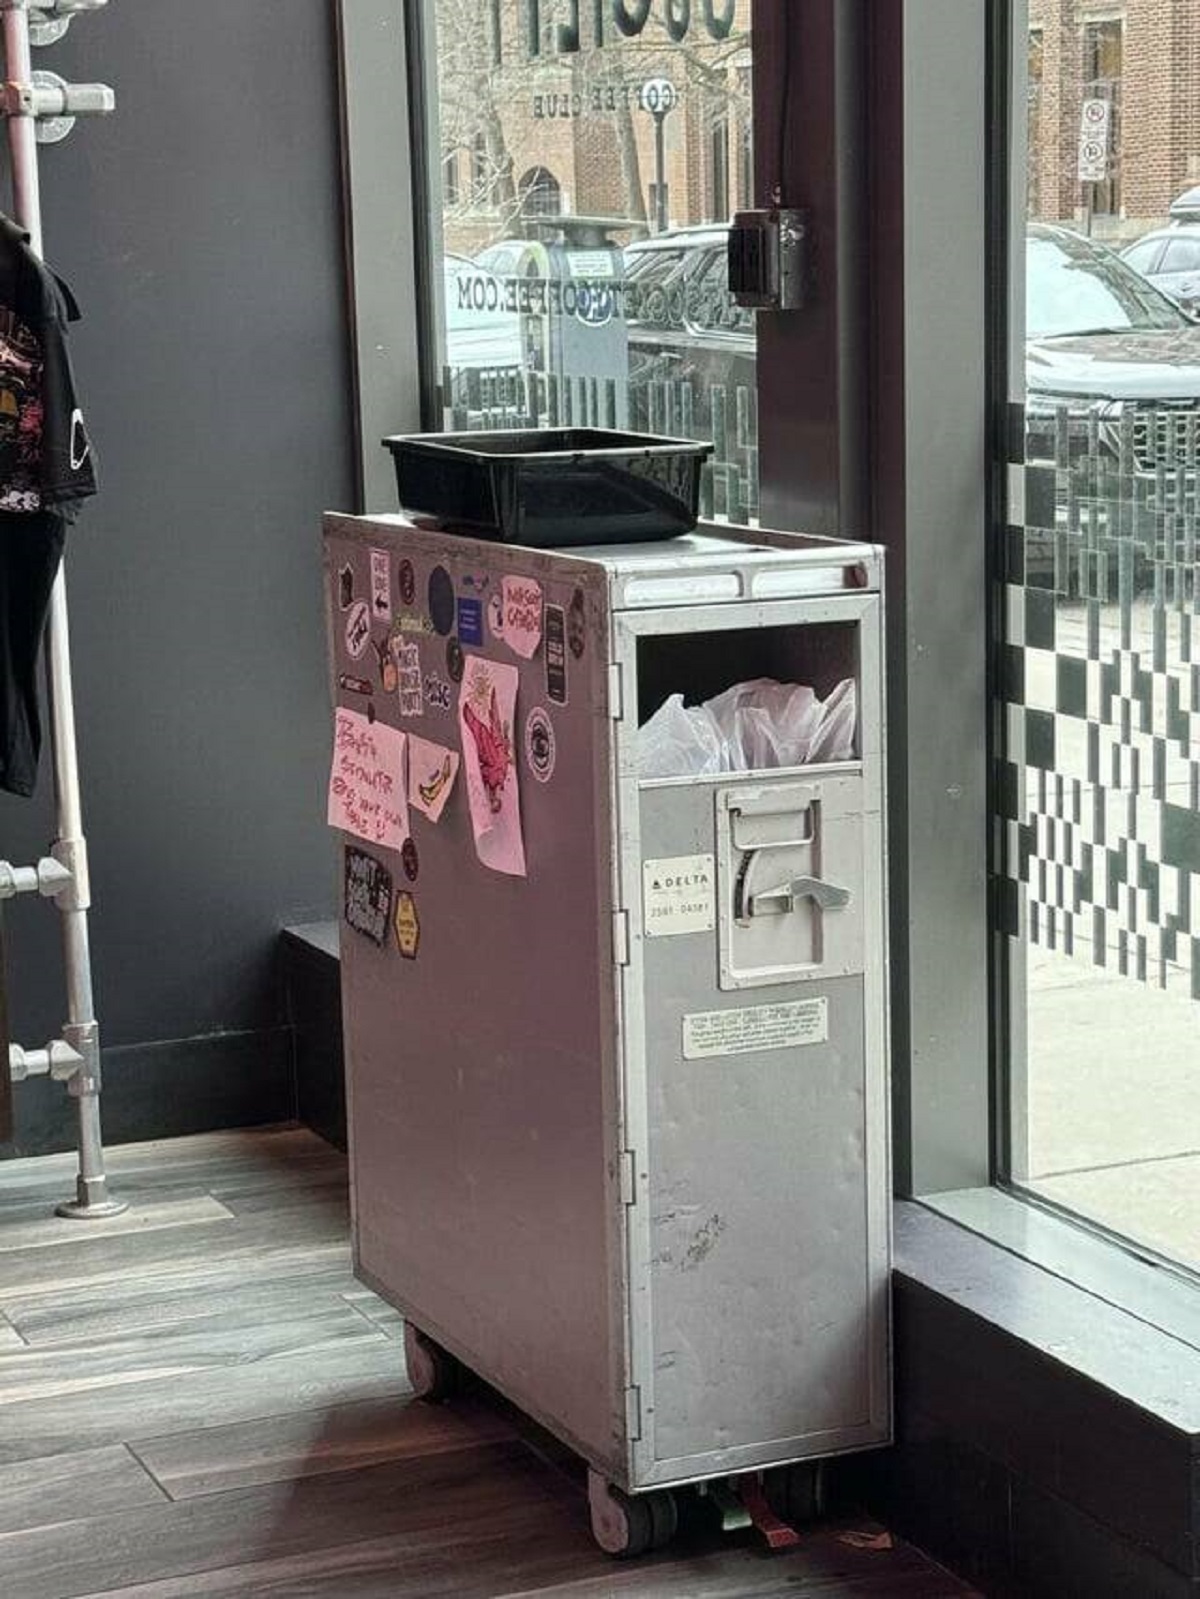 "Coffee shop uses airline food cart as trash cans"